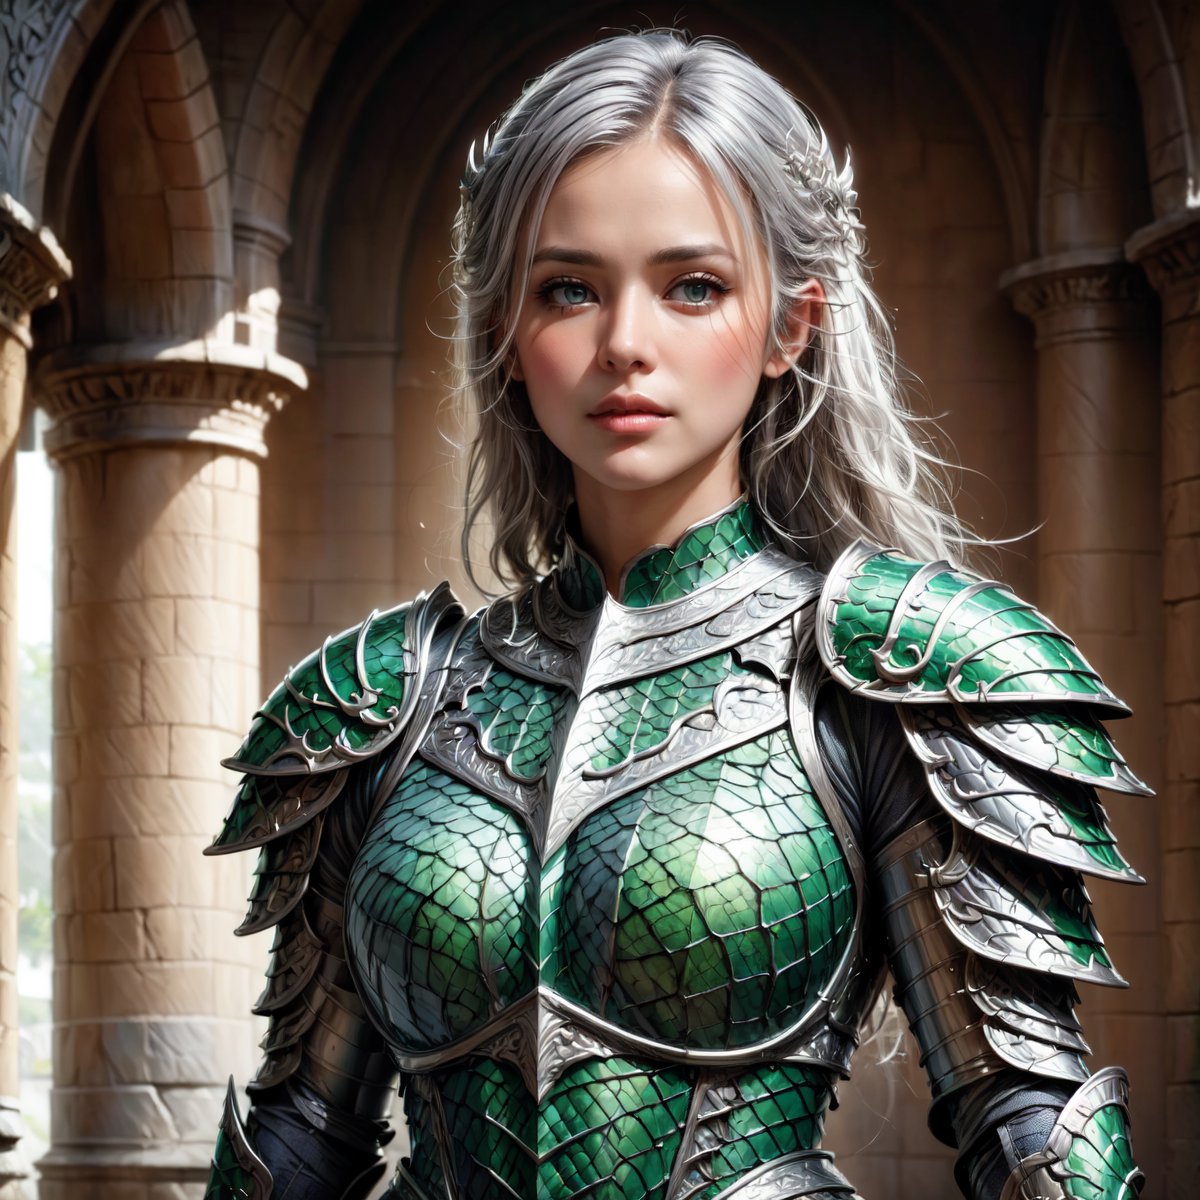 (((Top Quality: 1.4))), (Unparalleled Masterpiece), (Ultra High Definition), (Art by Carne Griffiths), (Ultra-Realistic 8k CG), official art,attractive posing, female gladiator, stunningly beautiful cleaned face,highly detailed armor , messy Hair,  muscular_body:1.4, tanned skin:1.4,( stone buildings background),sunlight makes beautiful gradient of shadow and adds depth to image, (muted colors, dim colors, muted tones: 1.3), low saturation, (hyper detail: 1.2), perfect anatomy,(upper body image :1.5),Female,dragon armor